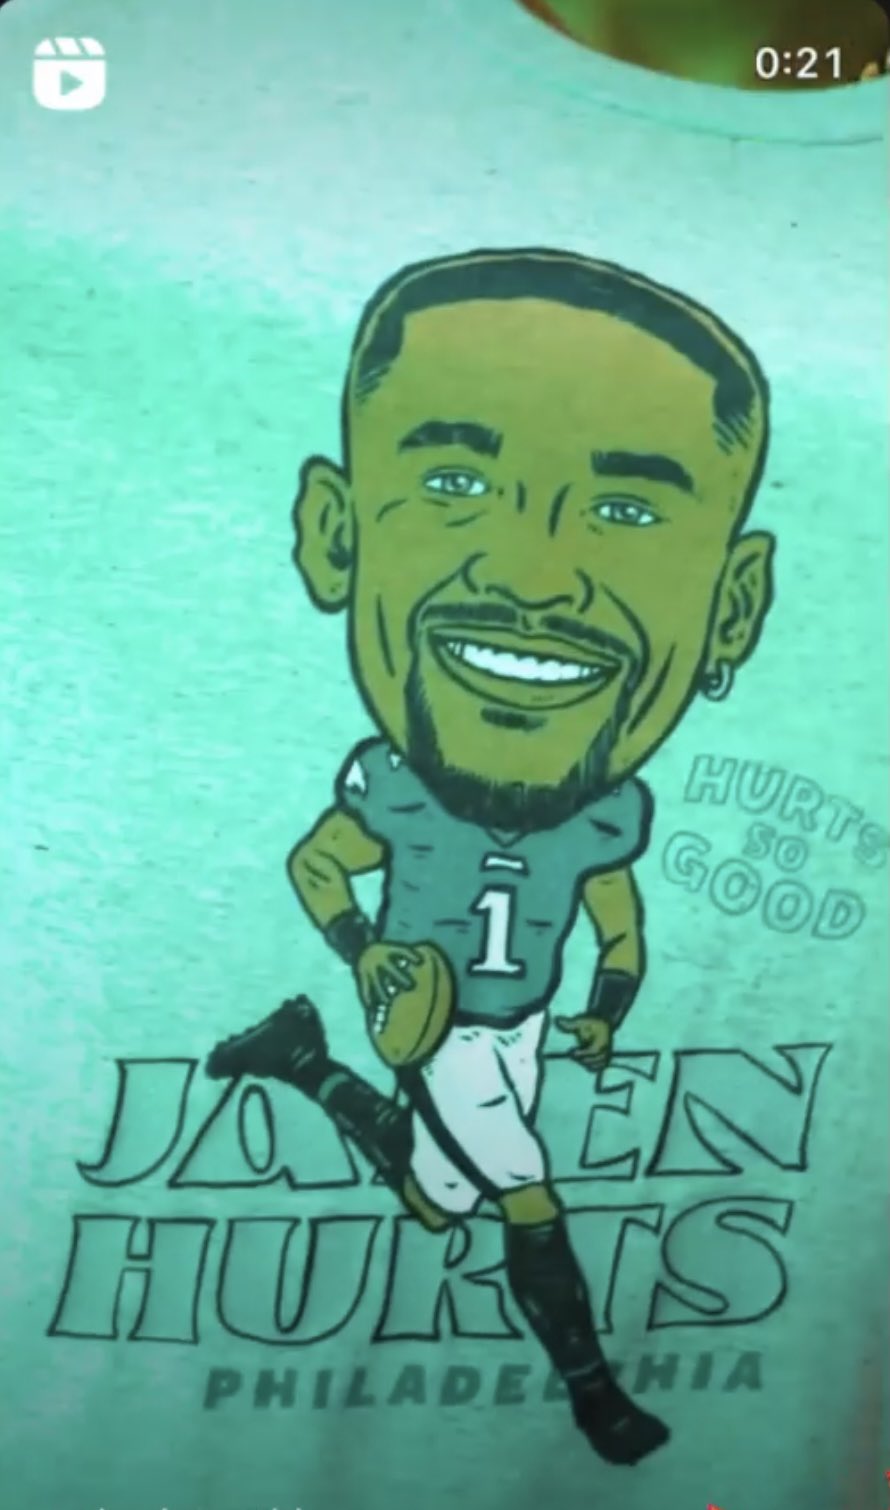 NFL to donate all proceeds from Eagles underdog T-shirt sales to Philly  school fund